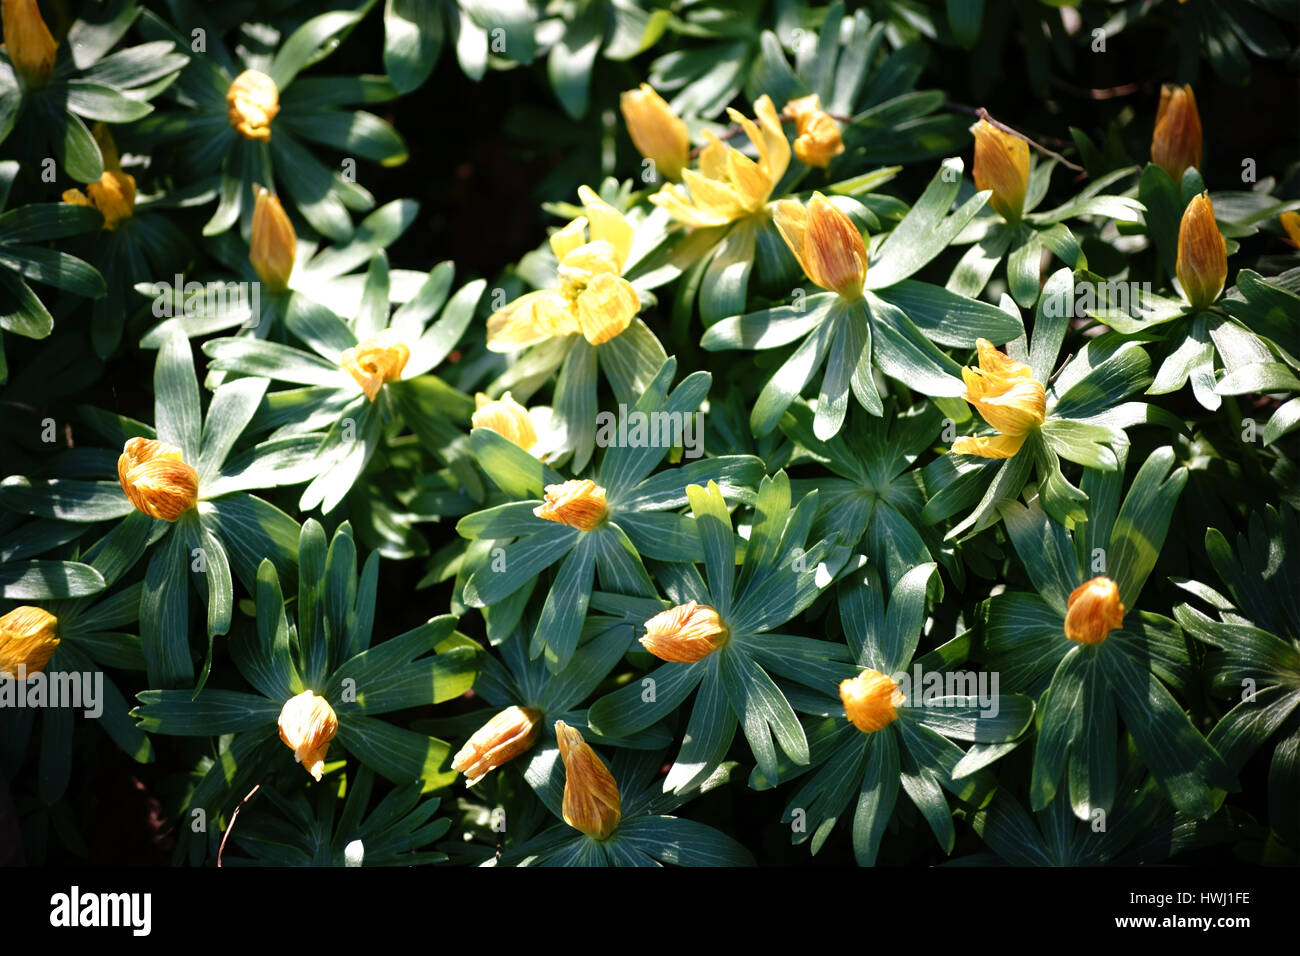 The closeup and top view of the yellow flowers of the Eranthis hyemalis. Stock Photo